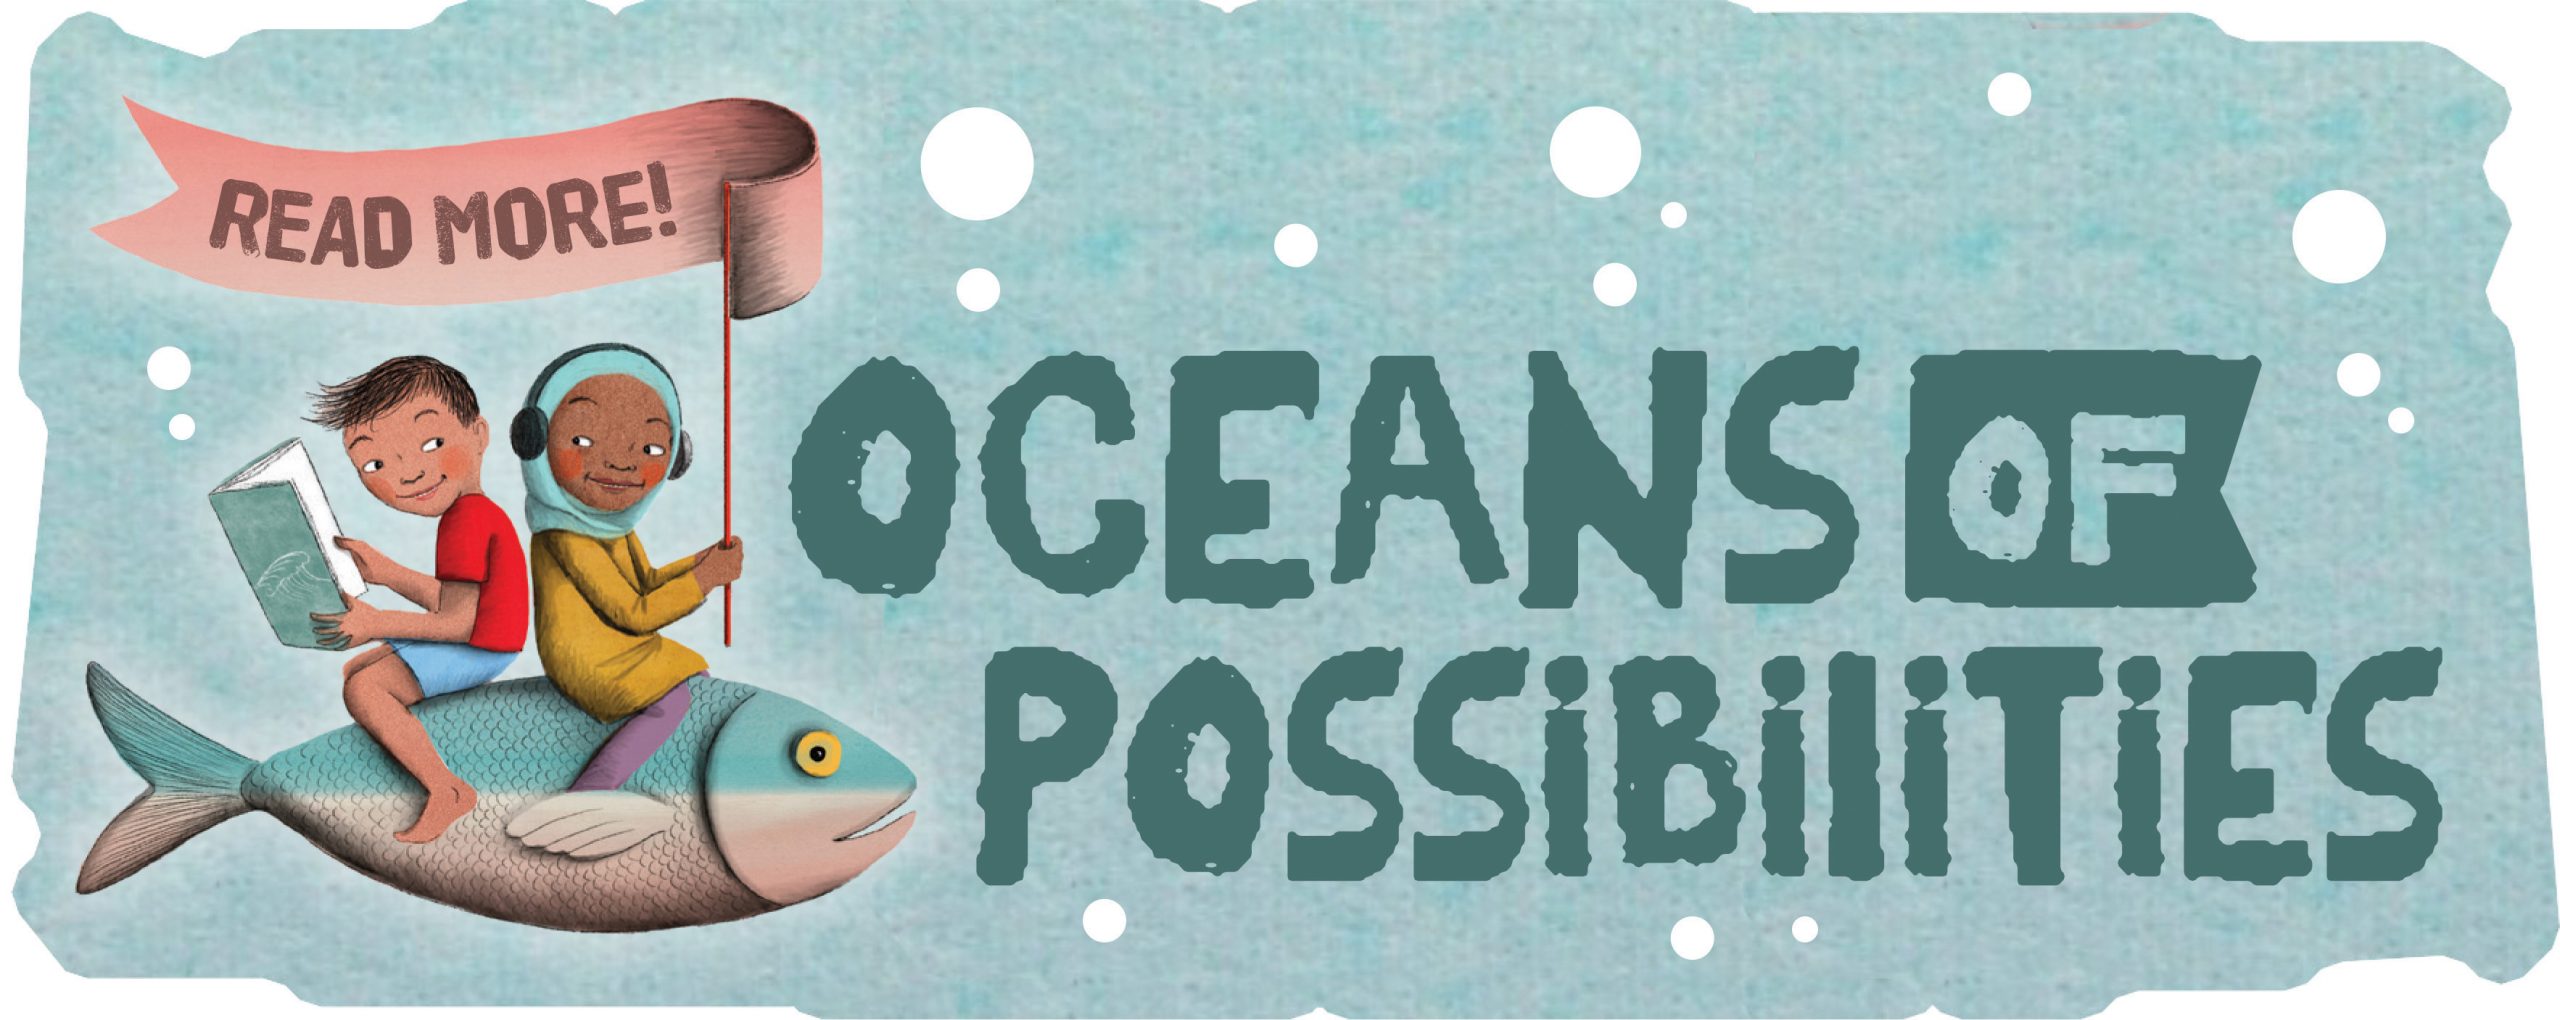 Two children riding a fish with the words "Oceans of Possibilies"